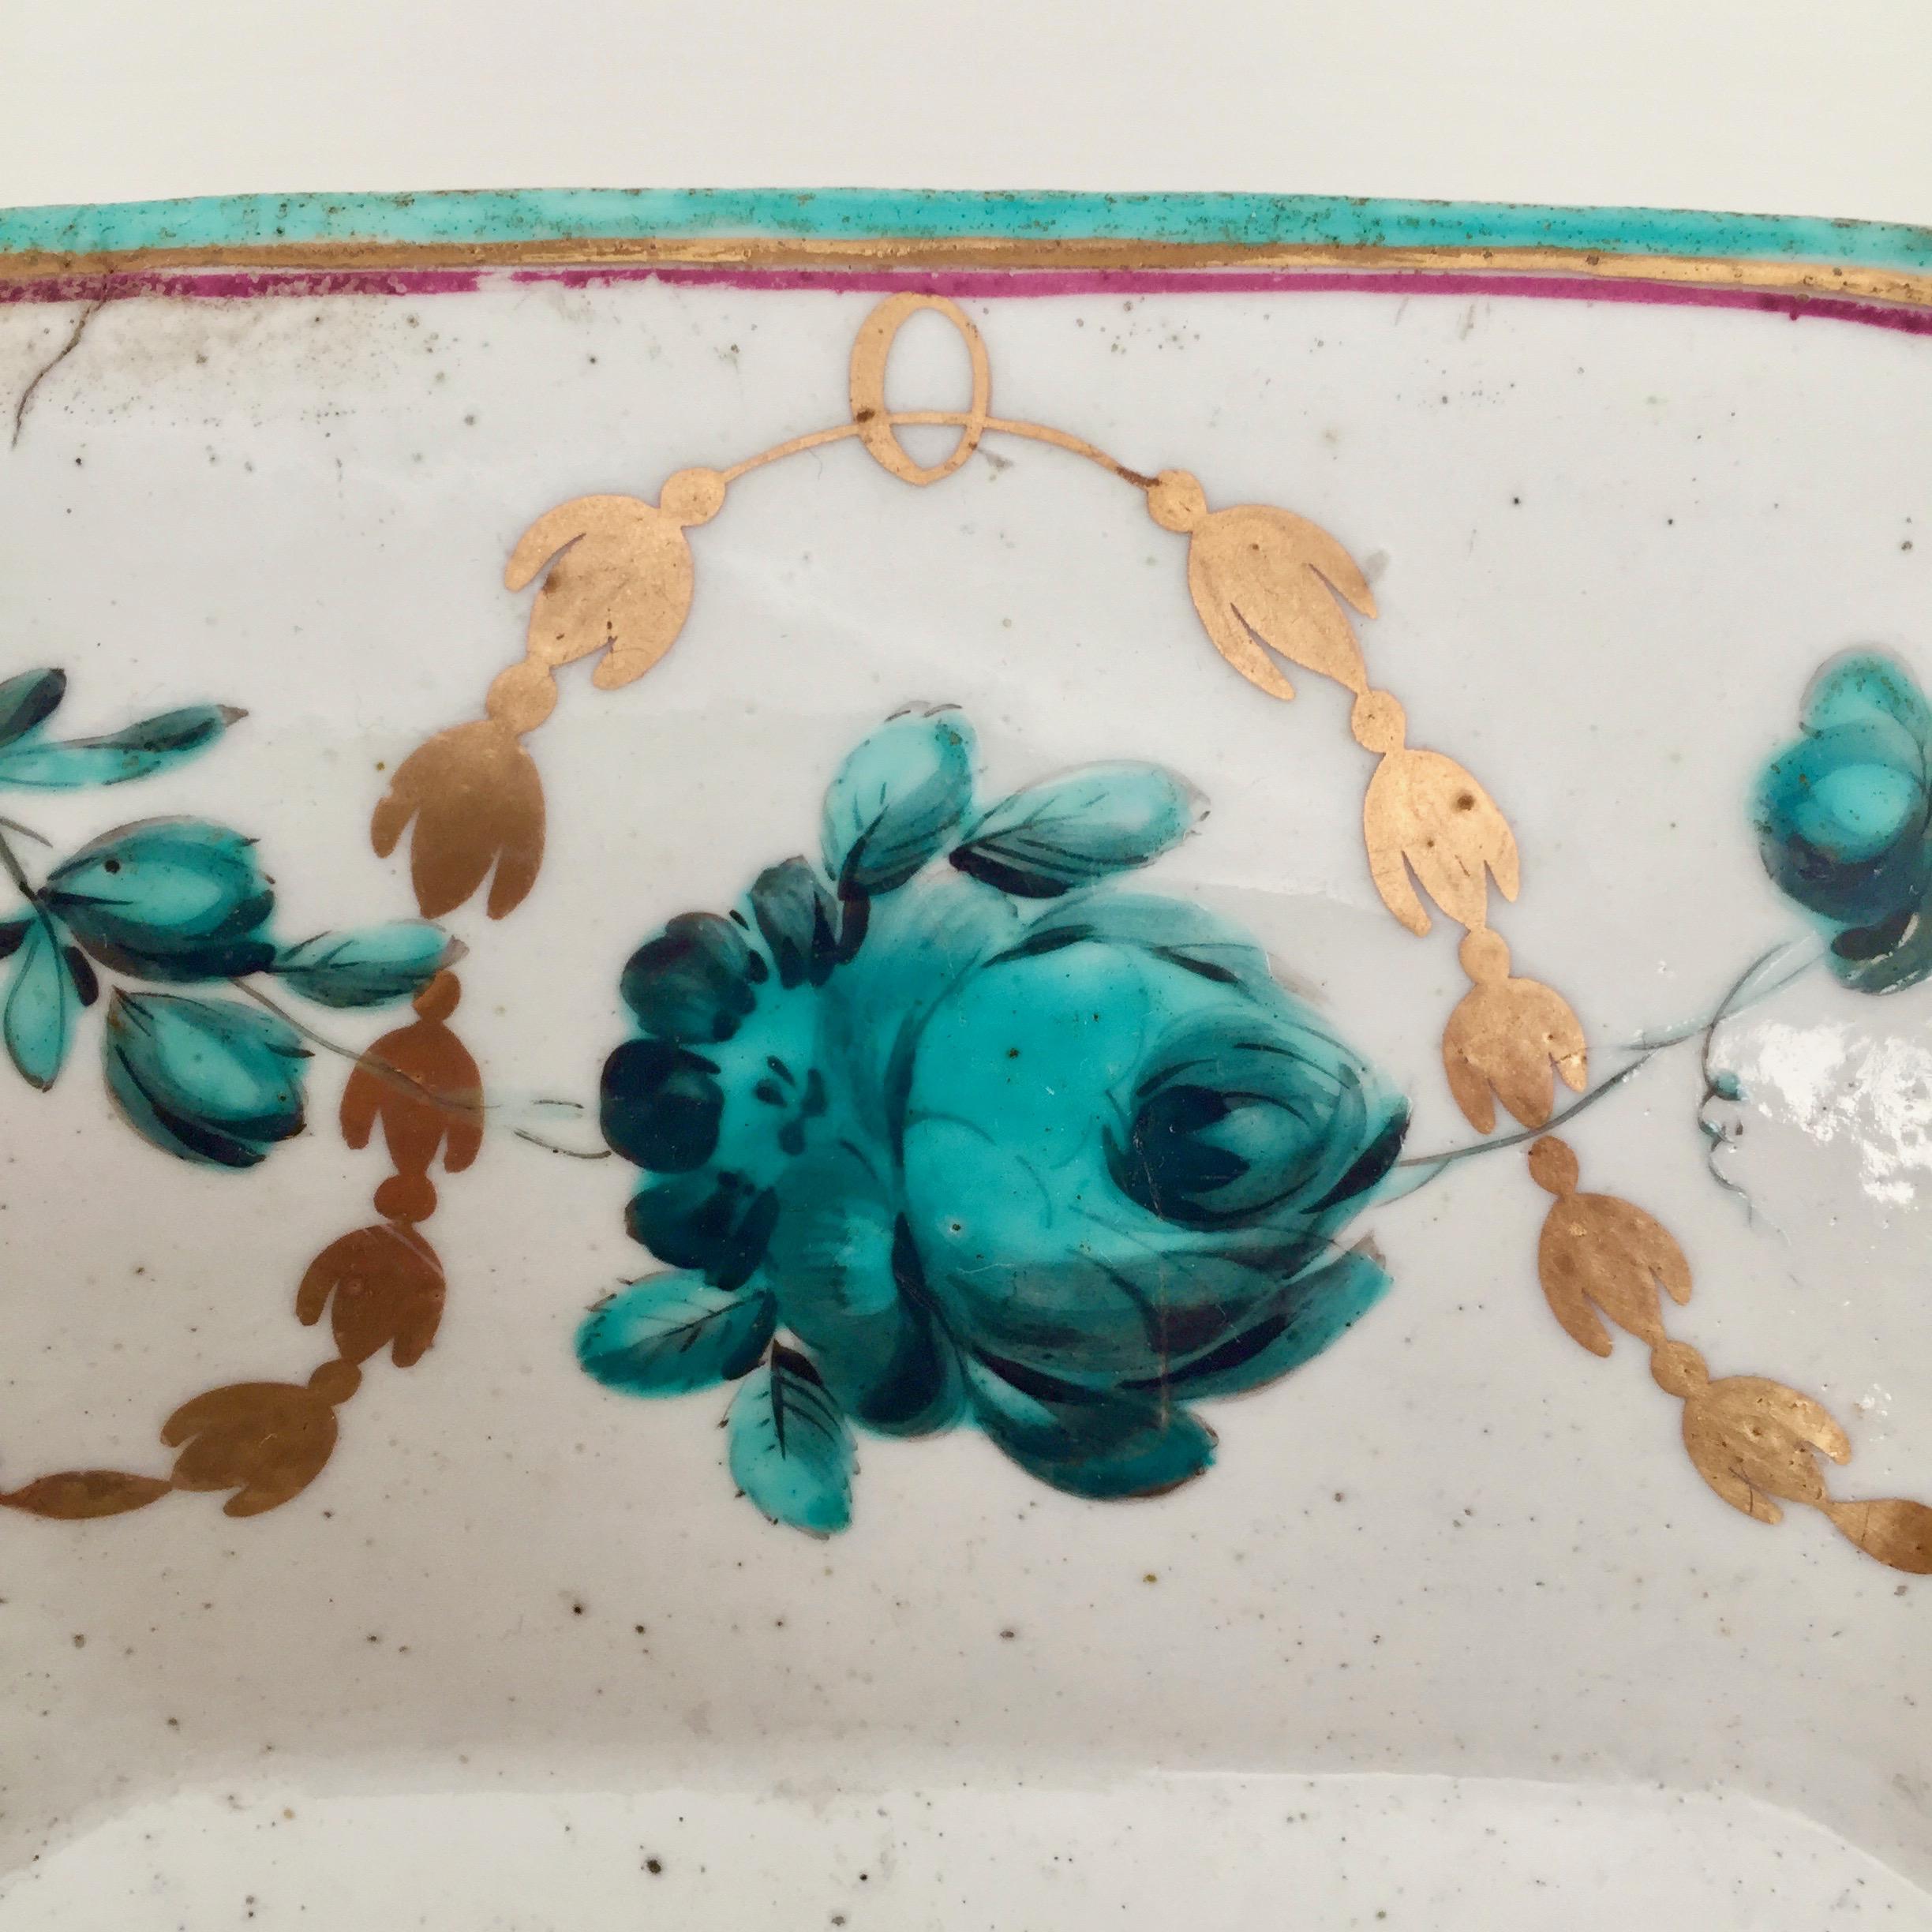 Mid-18th Century Chelsea Porcelain Octagonal Dish, Teal Flowers J Giles, Puce Anchor, 1753-1758